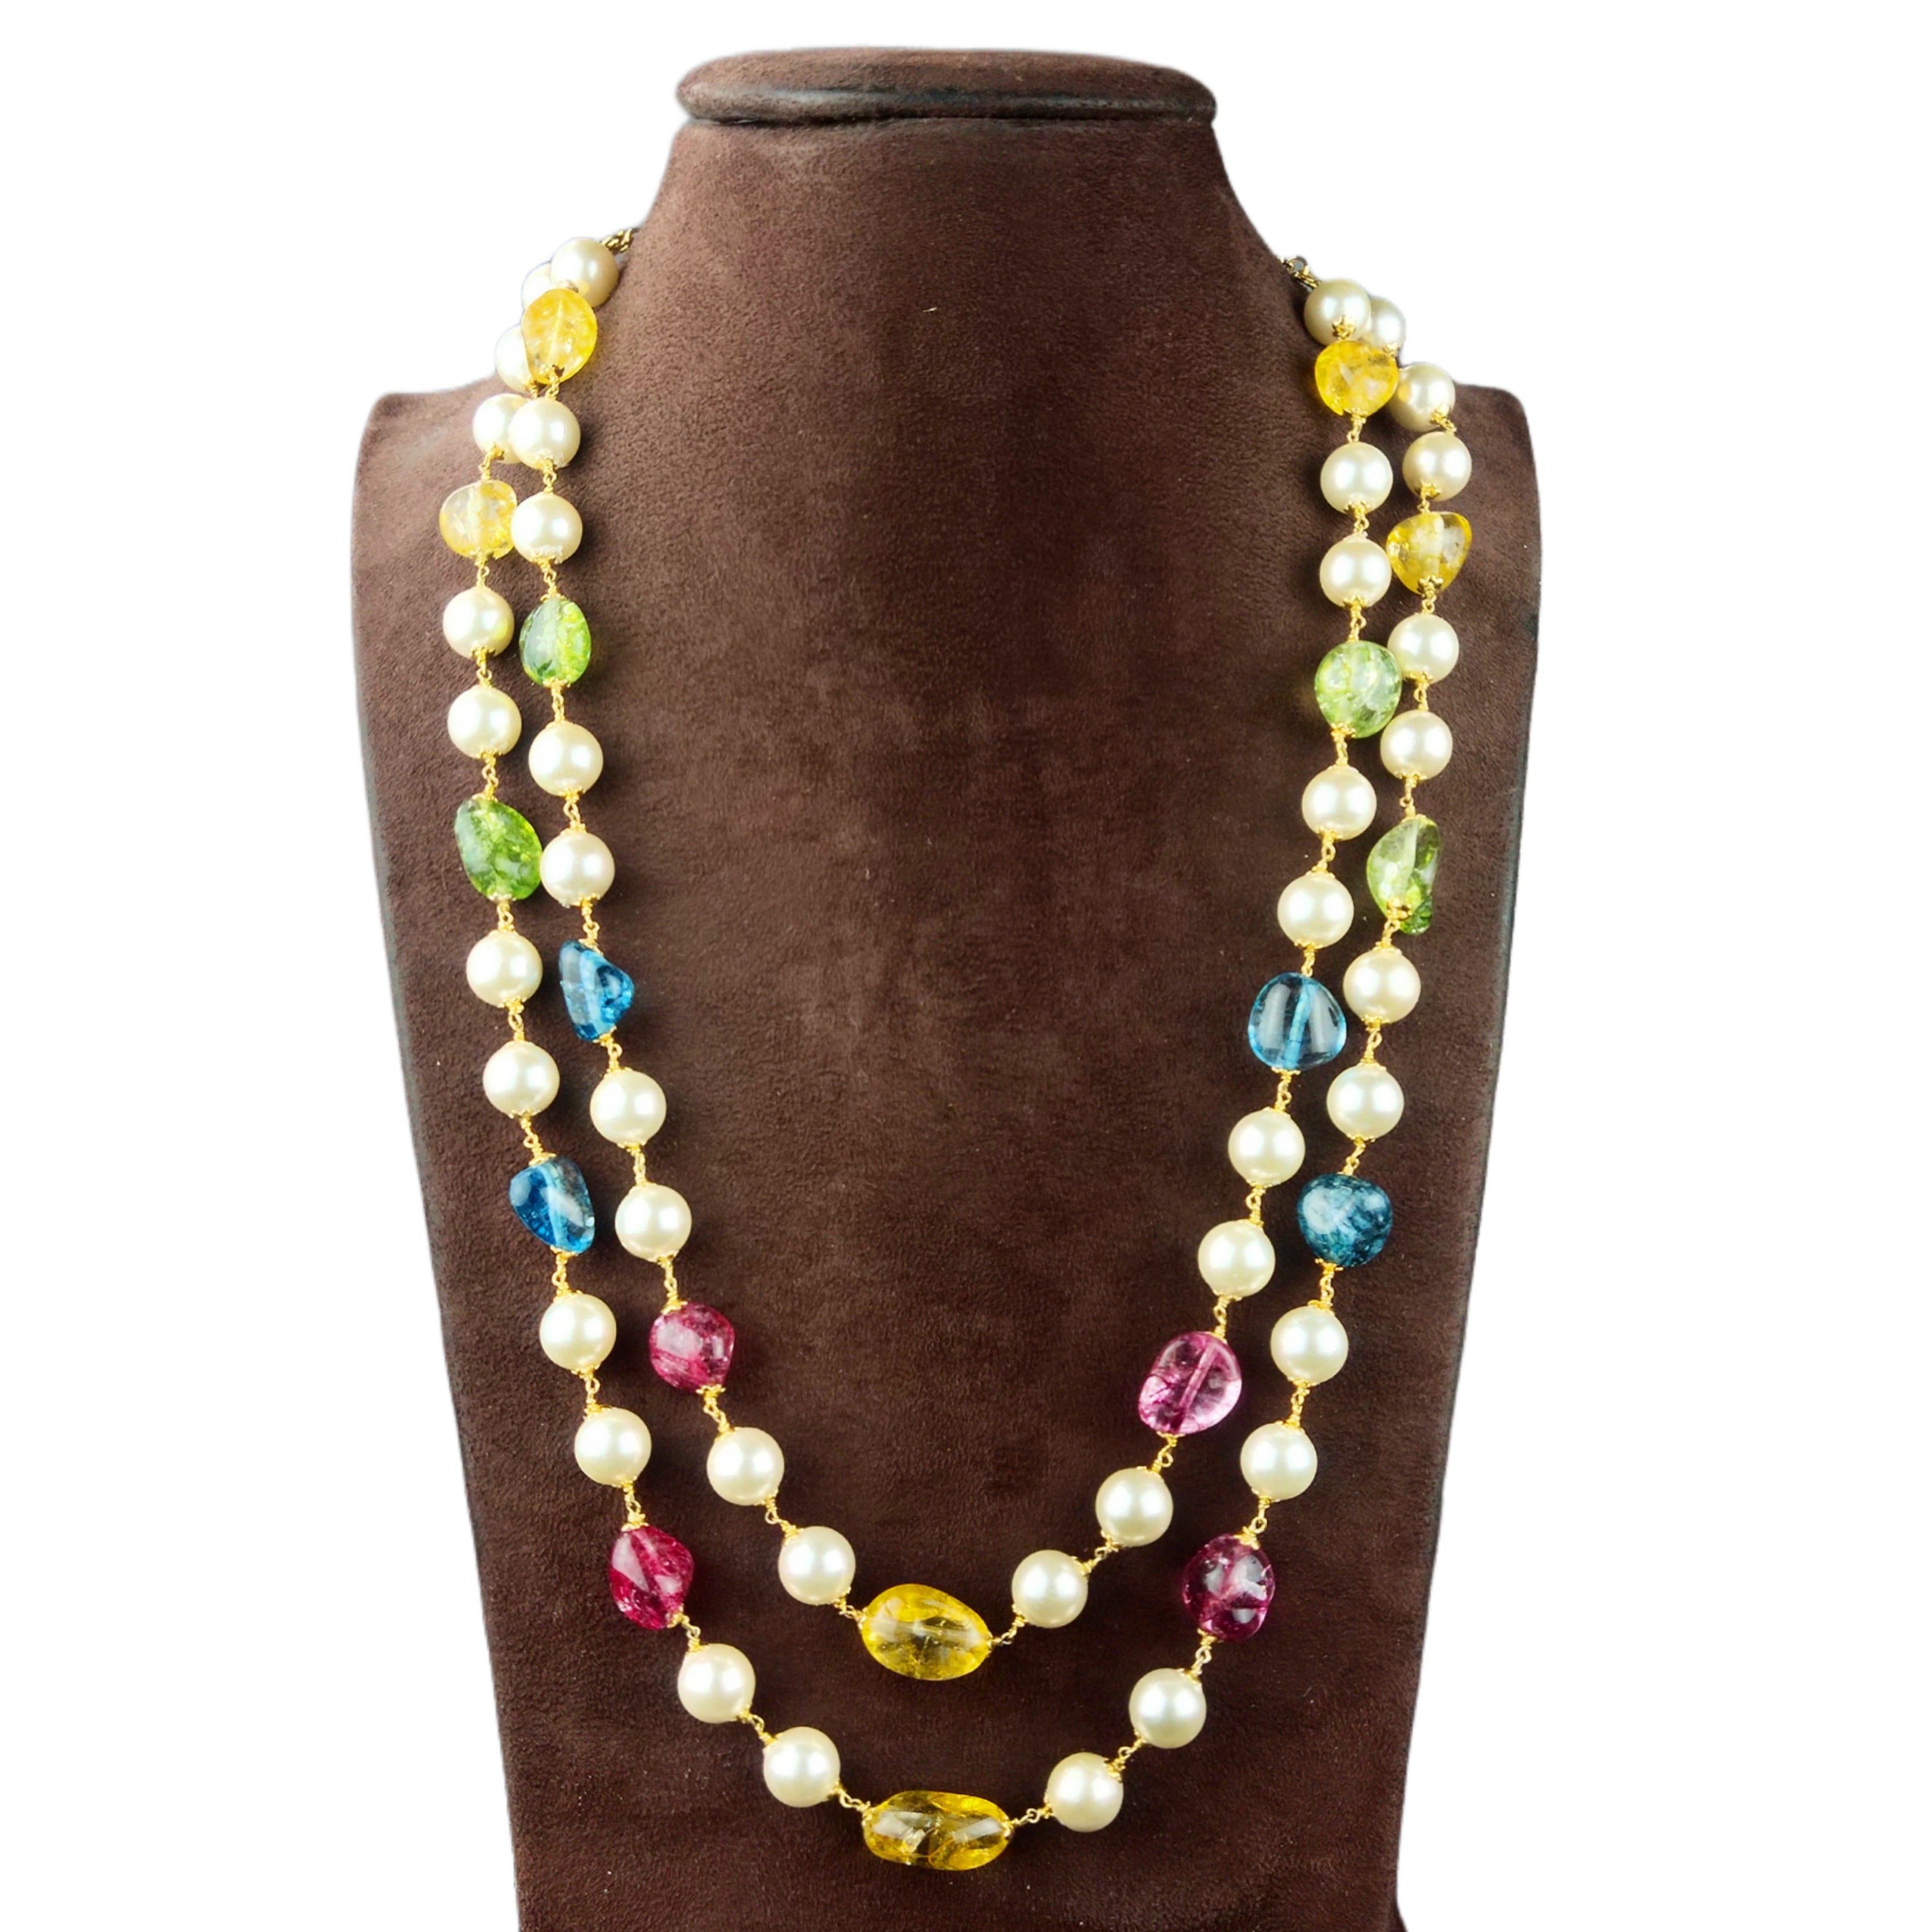 Wonder Nation Girl's Necklace Set, Gold tone and Multicolored Bead Necklaces  with Smiley Face Pendant, 3 Piece Set - Walmart.com